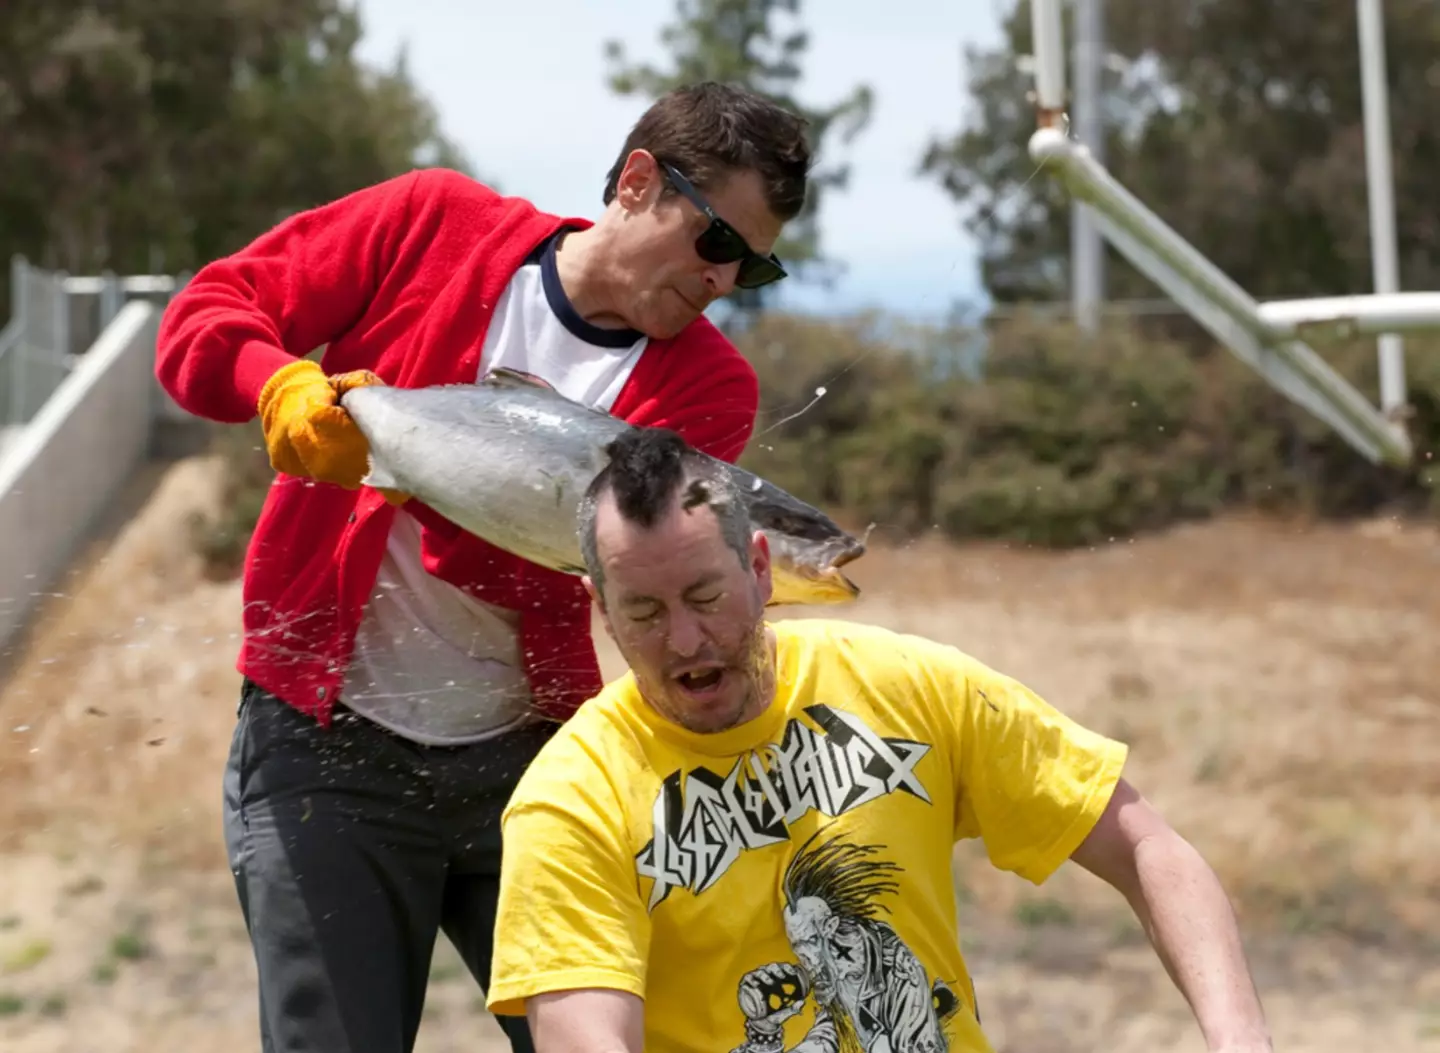 Ehren has appeared in both the Jackass series and the movies.